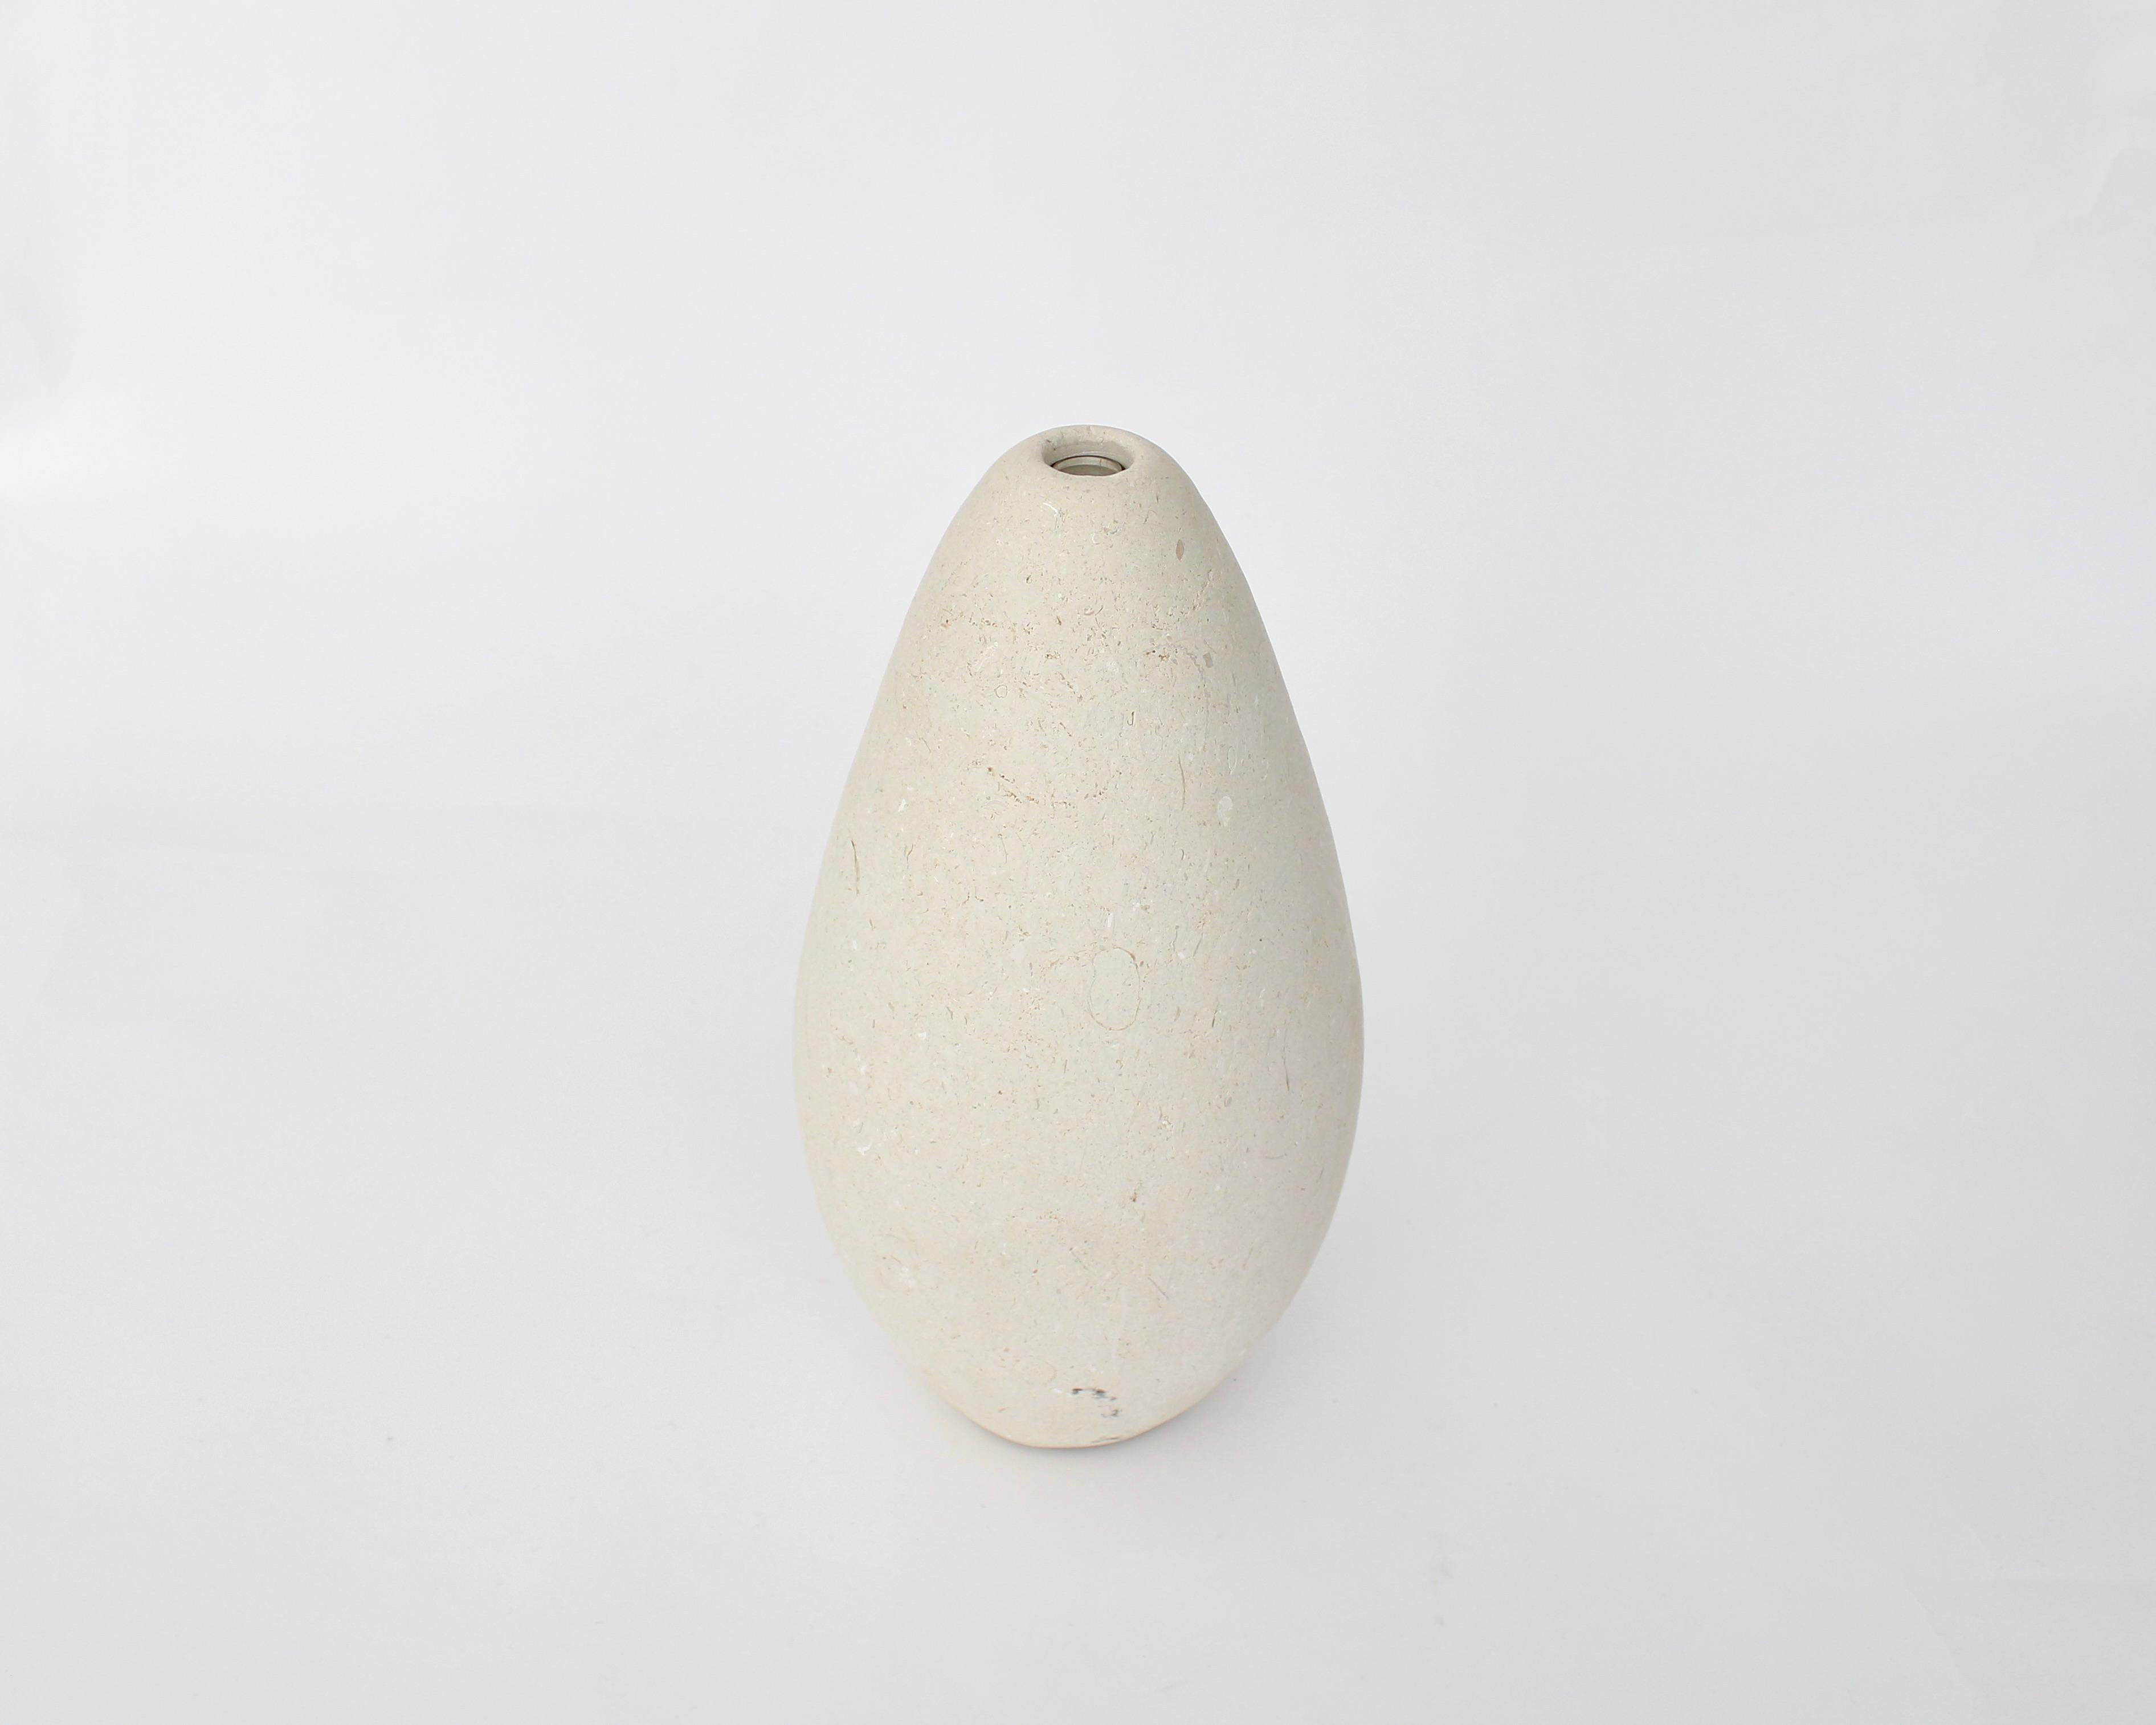 Mandorla Solifleur or single flower vase designed by Michael Verheyden is crafted in Pietra di Vicenza stone to form an organic shape and is beautiful as a vase or as sculpture. 
Belgian Designer Michael Verheyden creates uncommon objects for